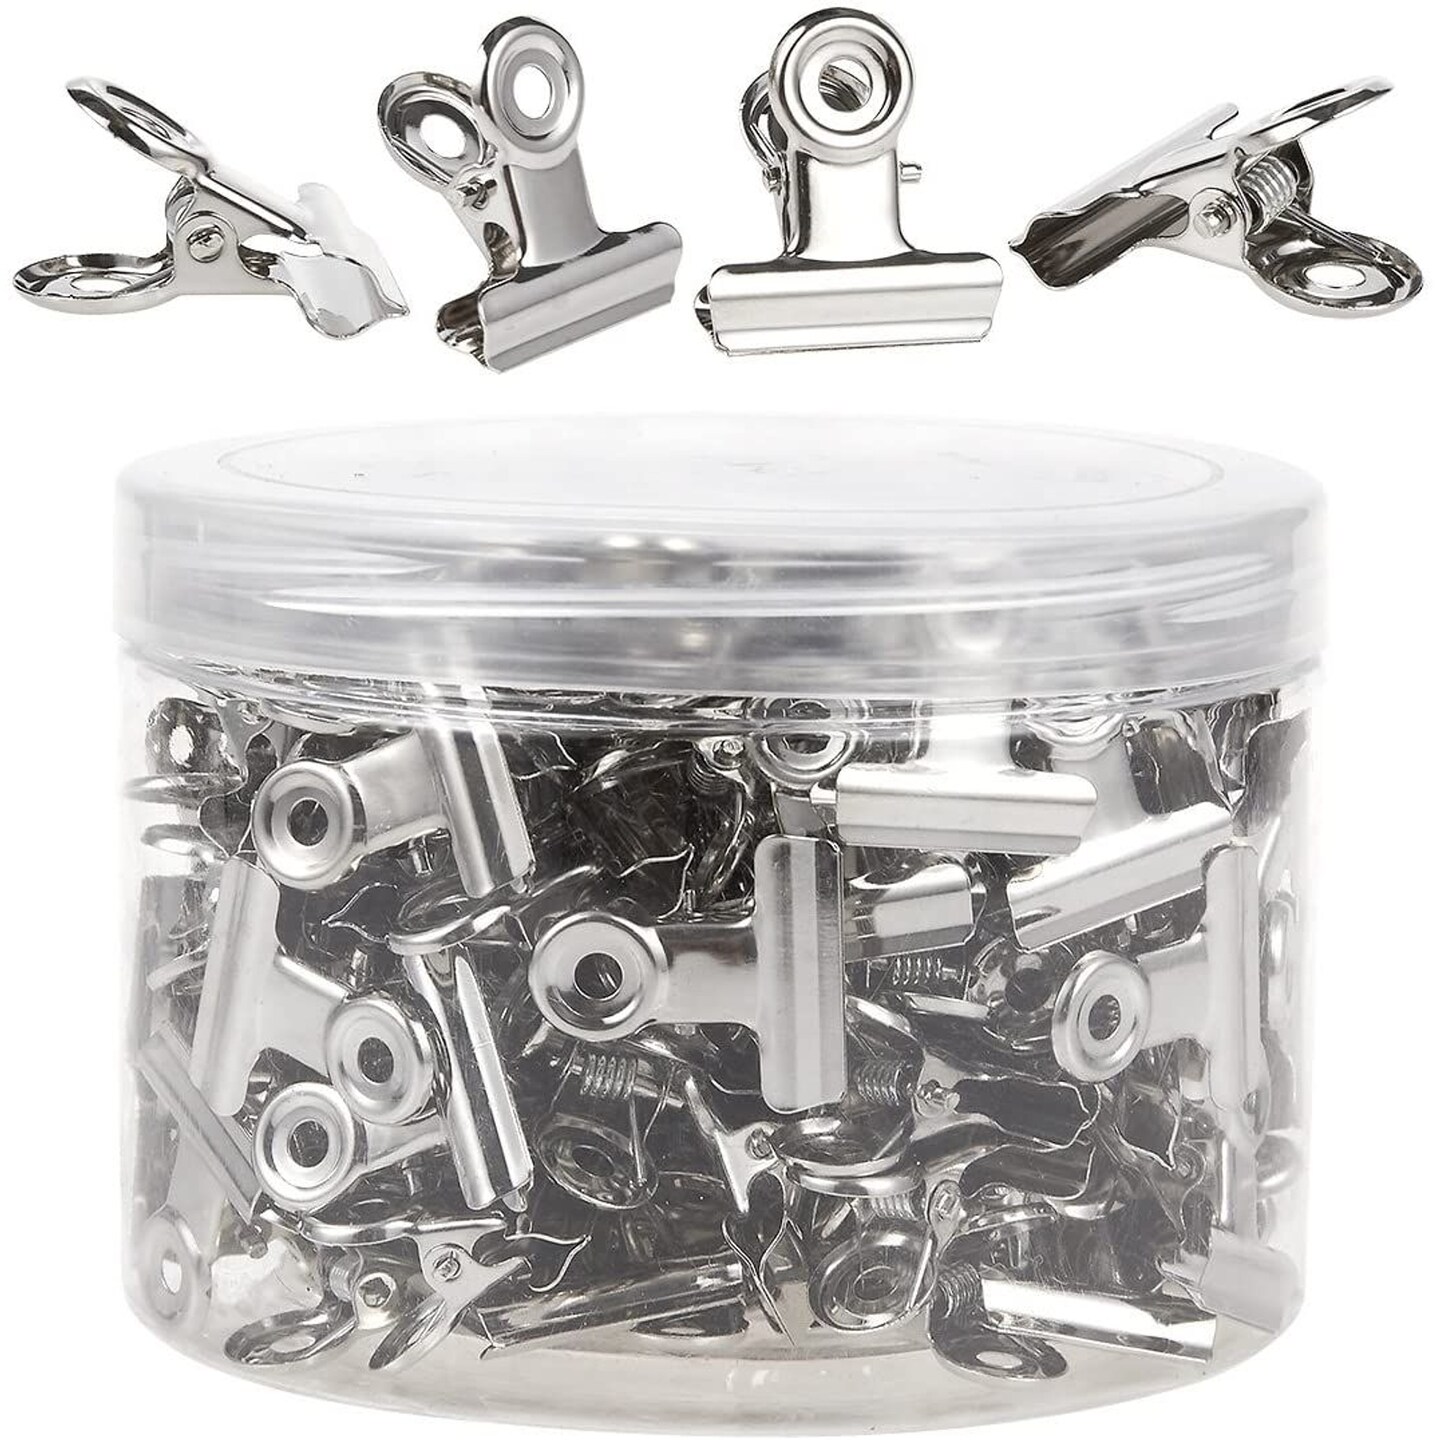 Stainless Steel Bulldog Clips,Mini Binder Clips (150-Pack)